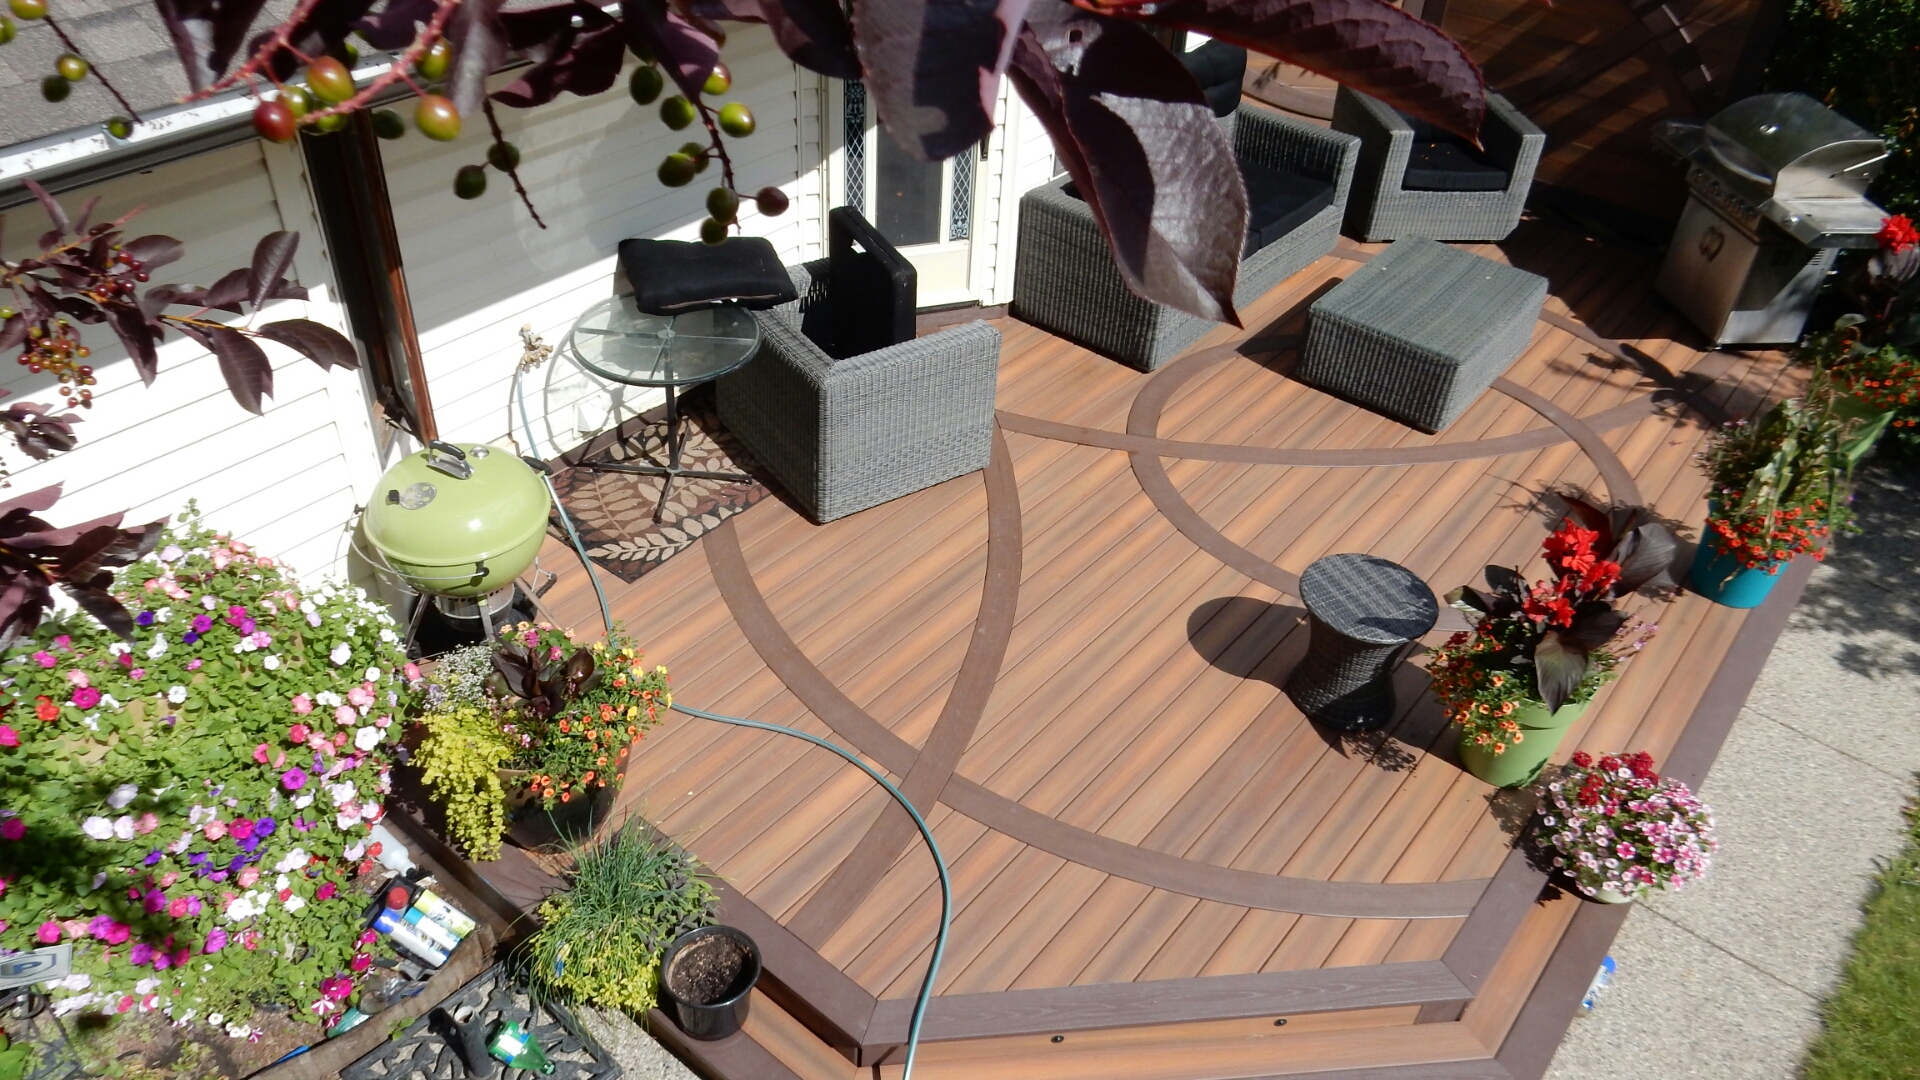 Accessories designed to enhance the overall finish of your deck project.